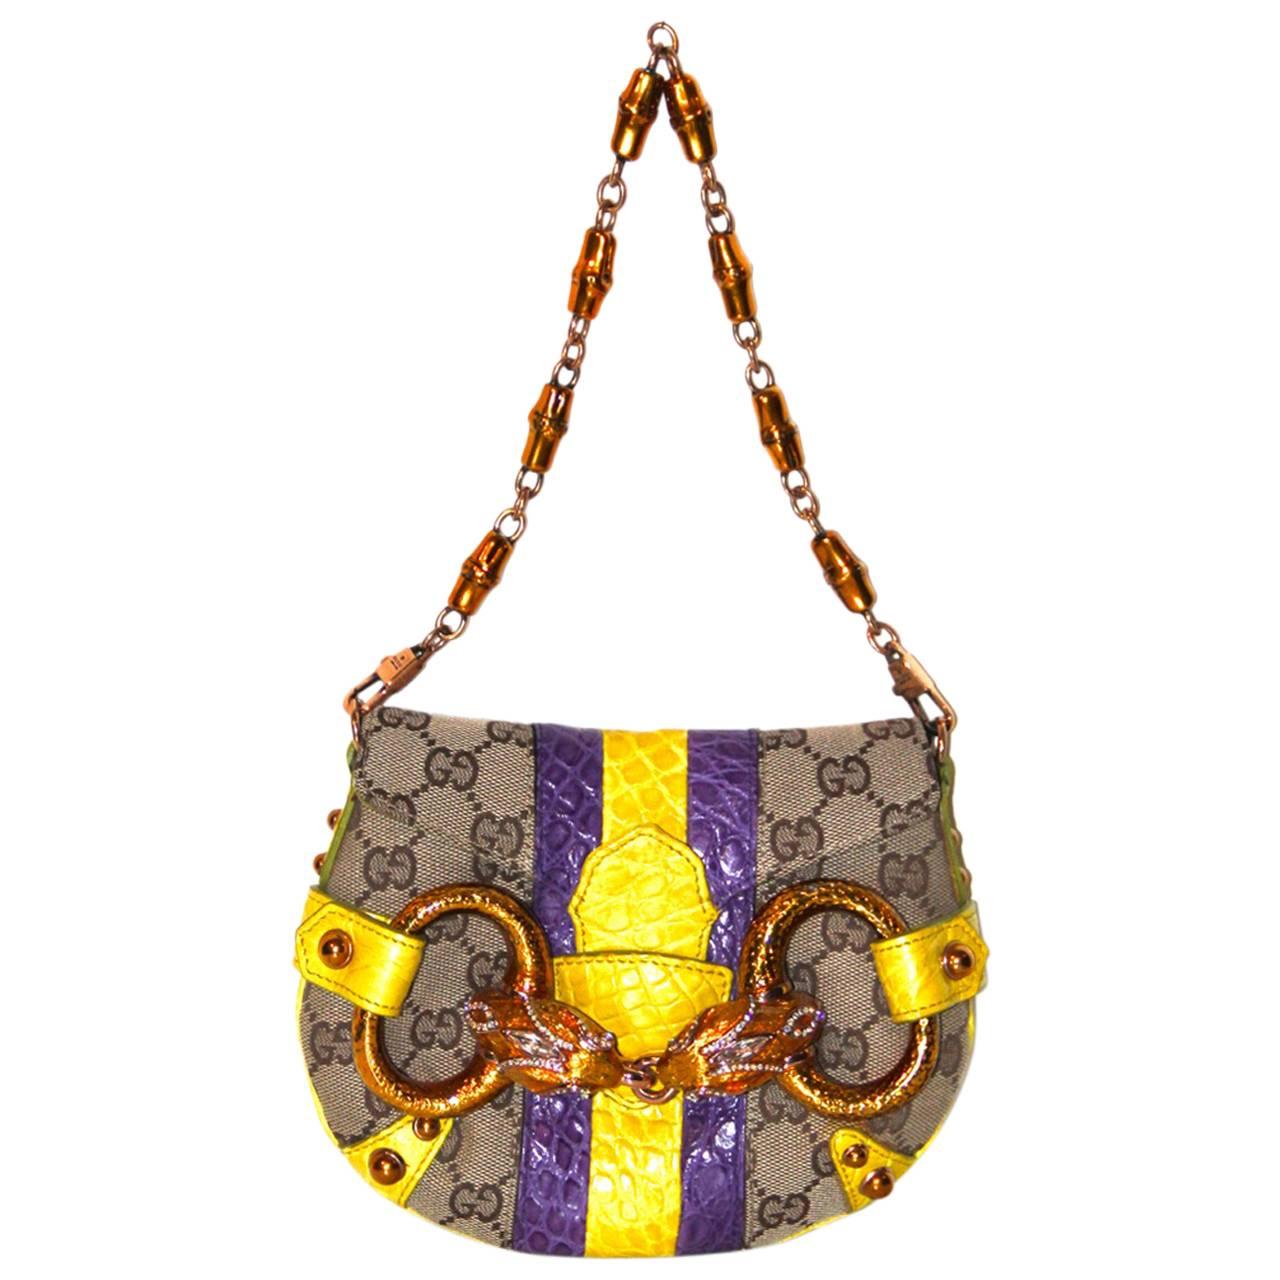 GUCCI Tom Ford Monogram Jeweled Snake Head Bag Limited Edition